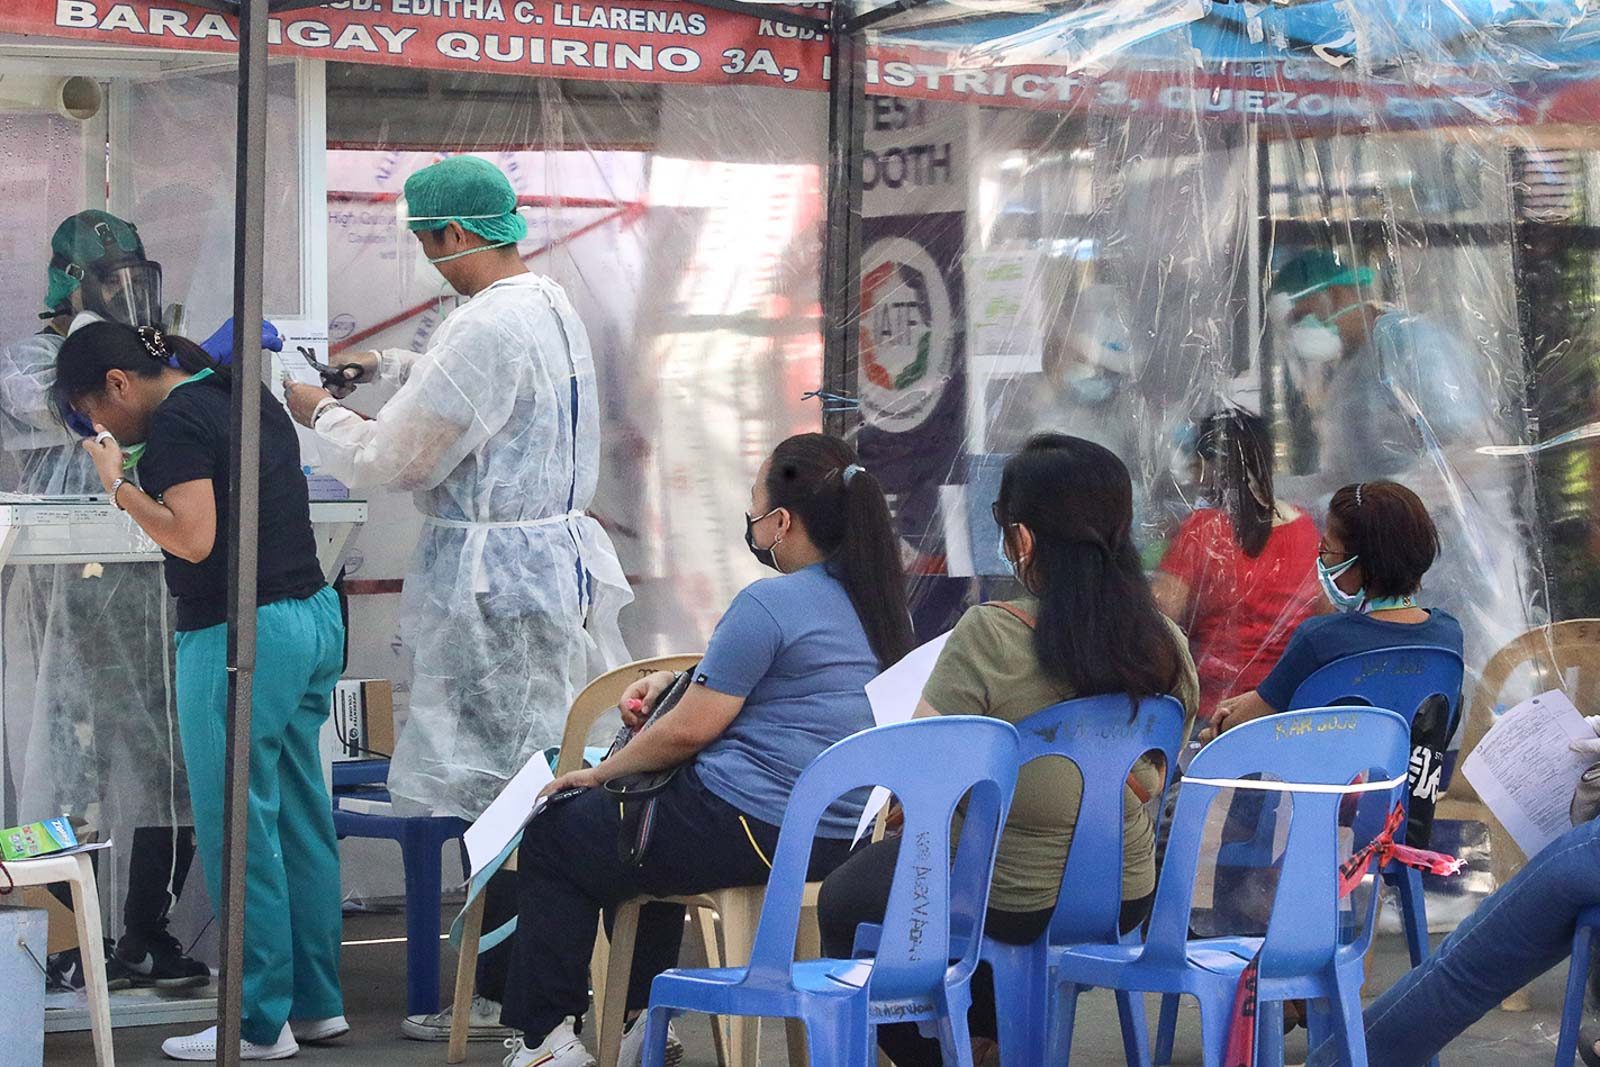 To stop future pandemics, support WHO and states with poor health care – doctors